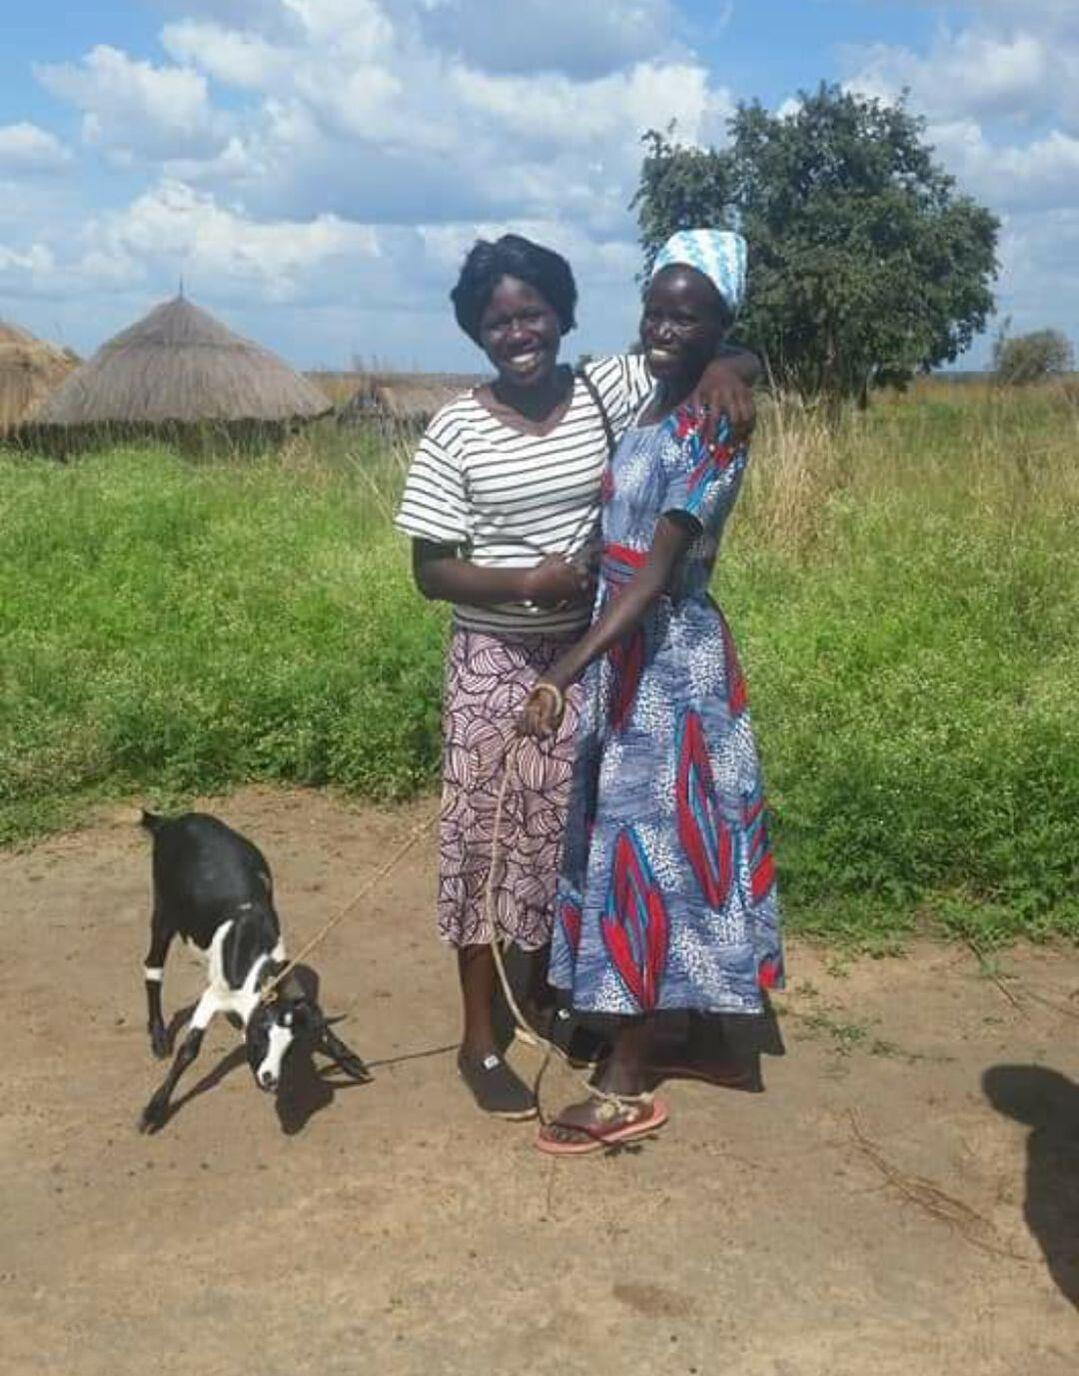 Sophia Muhidini is getting congratulations by her neighbor of she have received a goat donated by Tom Paladino for Wami-Sokoine women in Morogoro